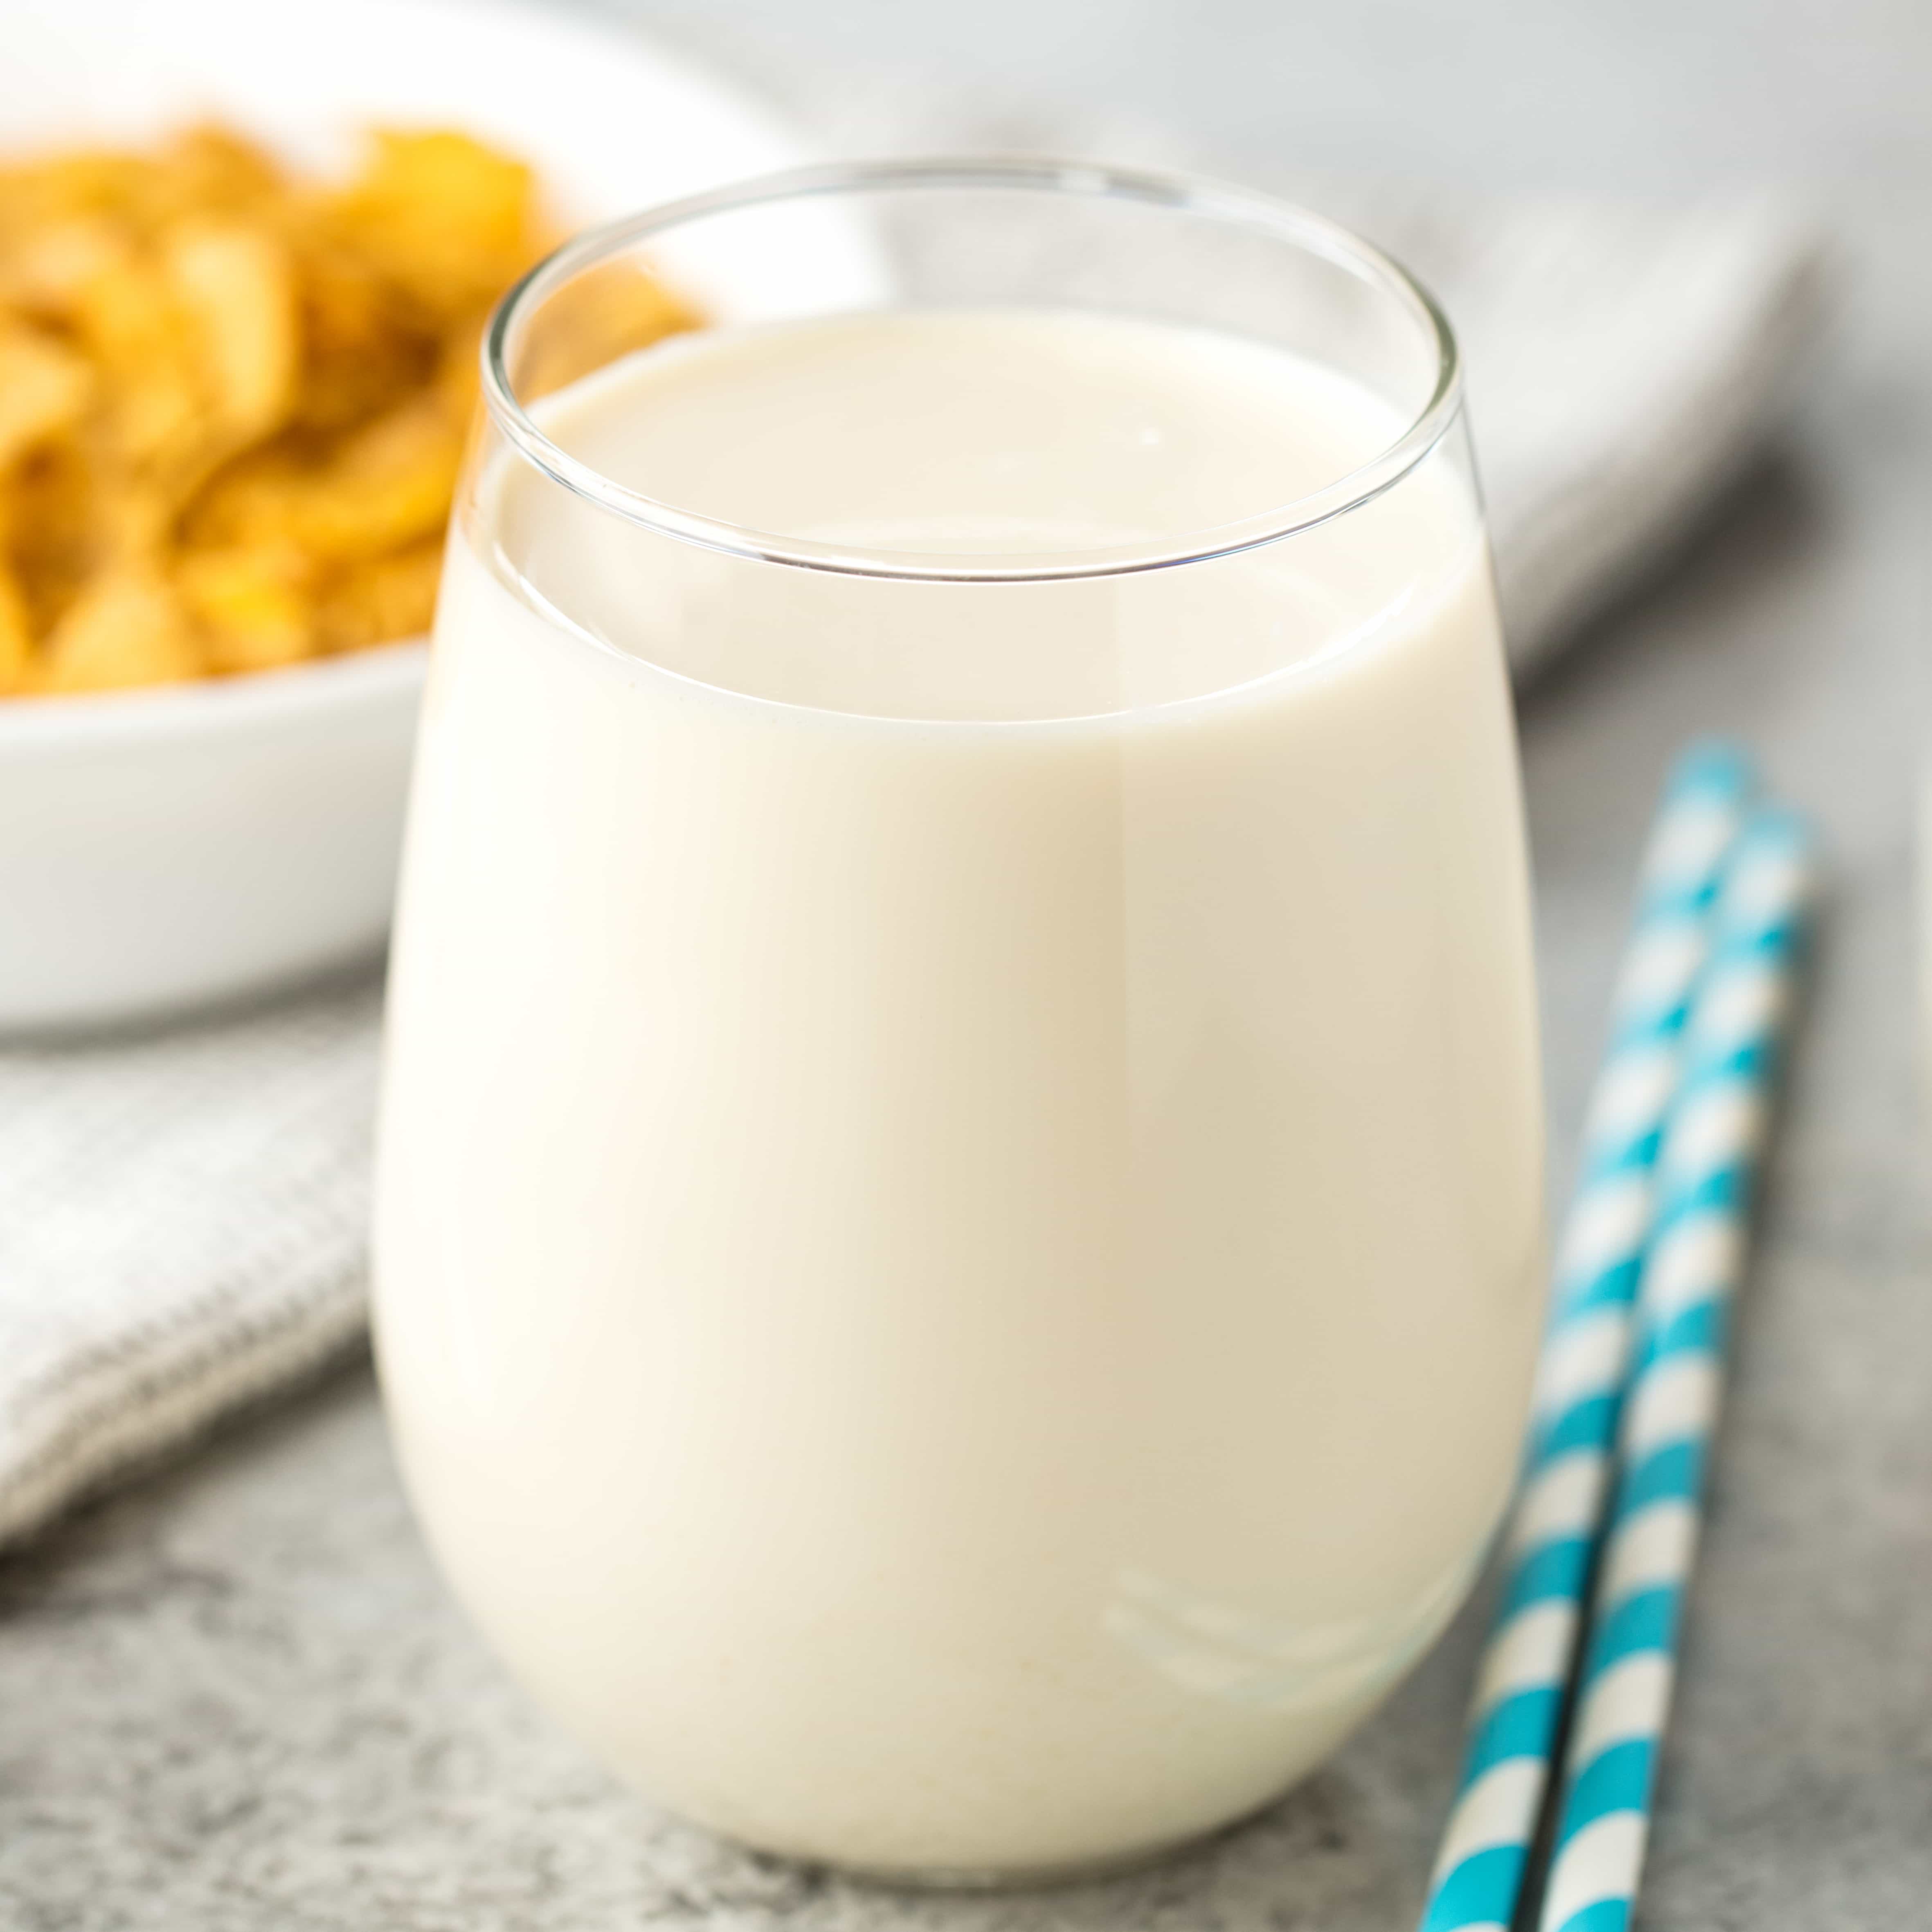 A glass of cereal milk with paper straws resting next to the glass